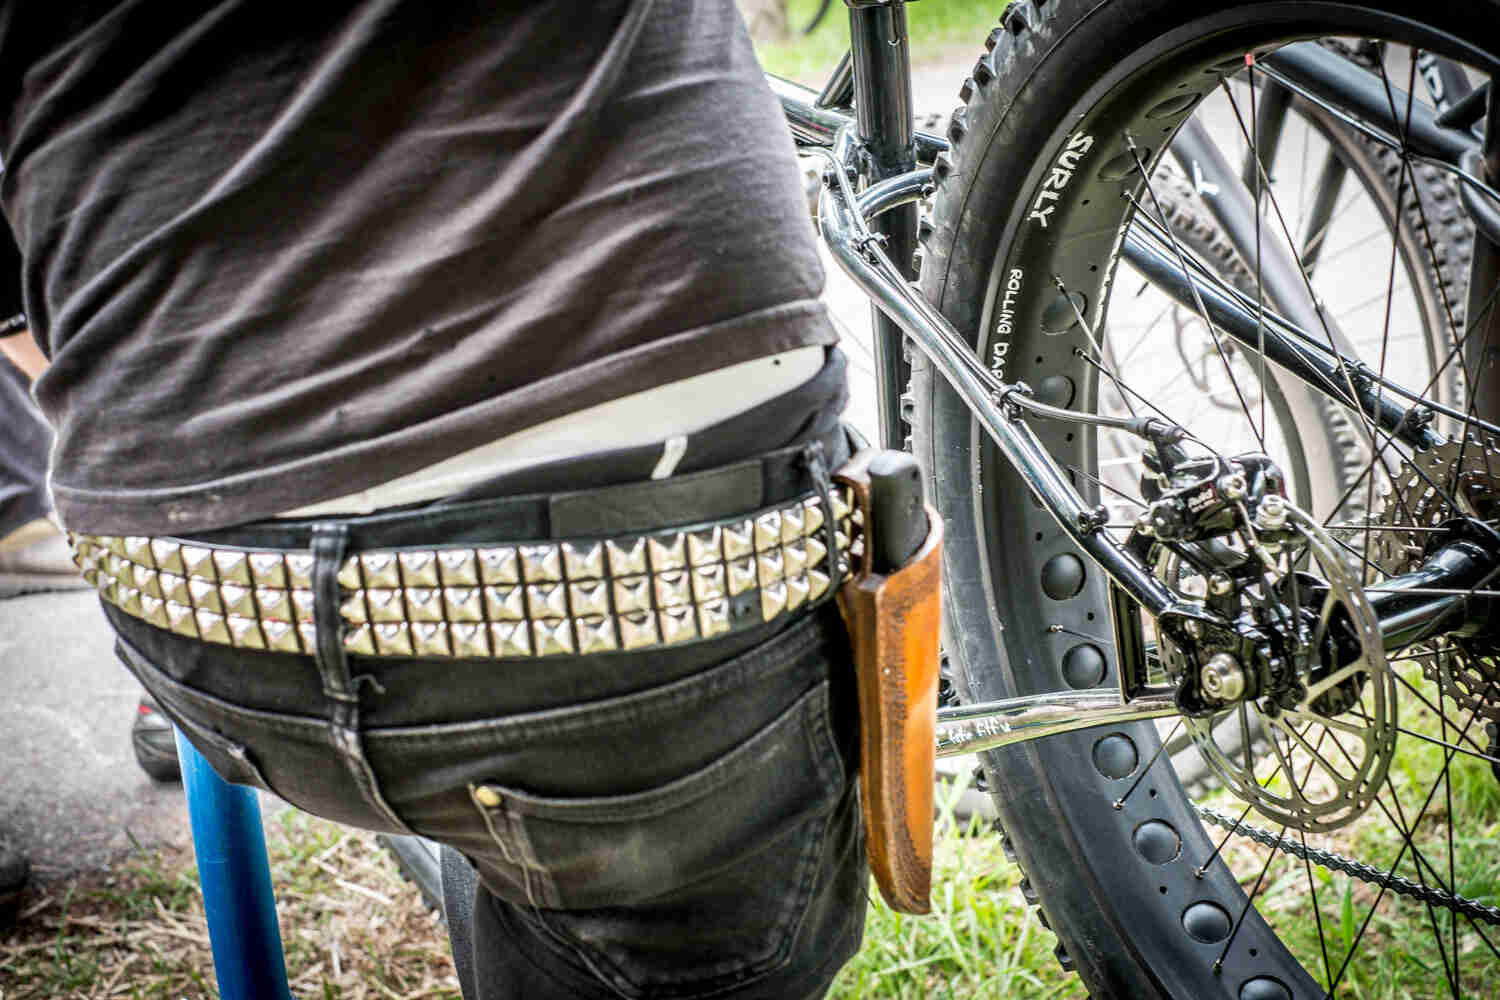 Rear view of a person's mid section, with a knife in a holster on a belt, and a Surly fat bike wheel on their right